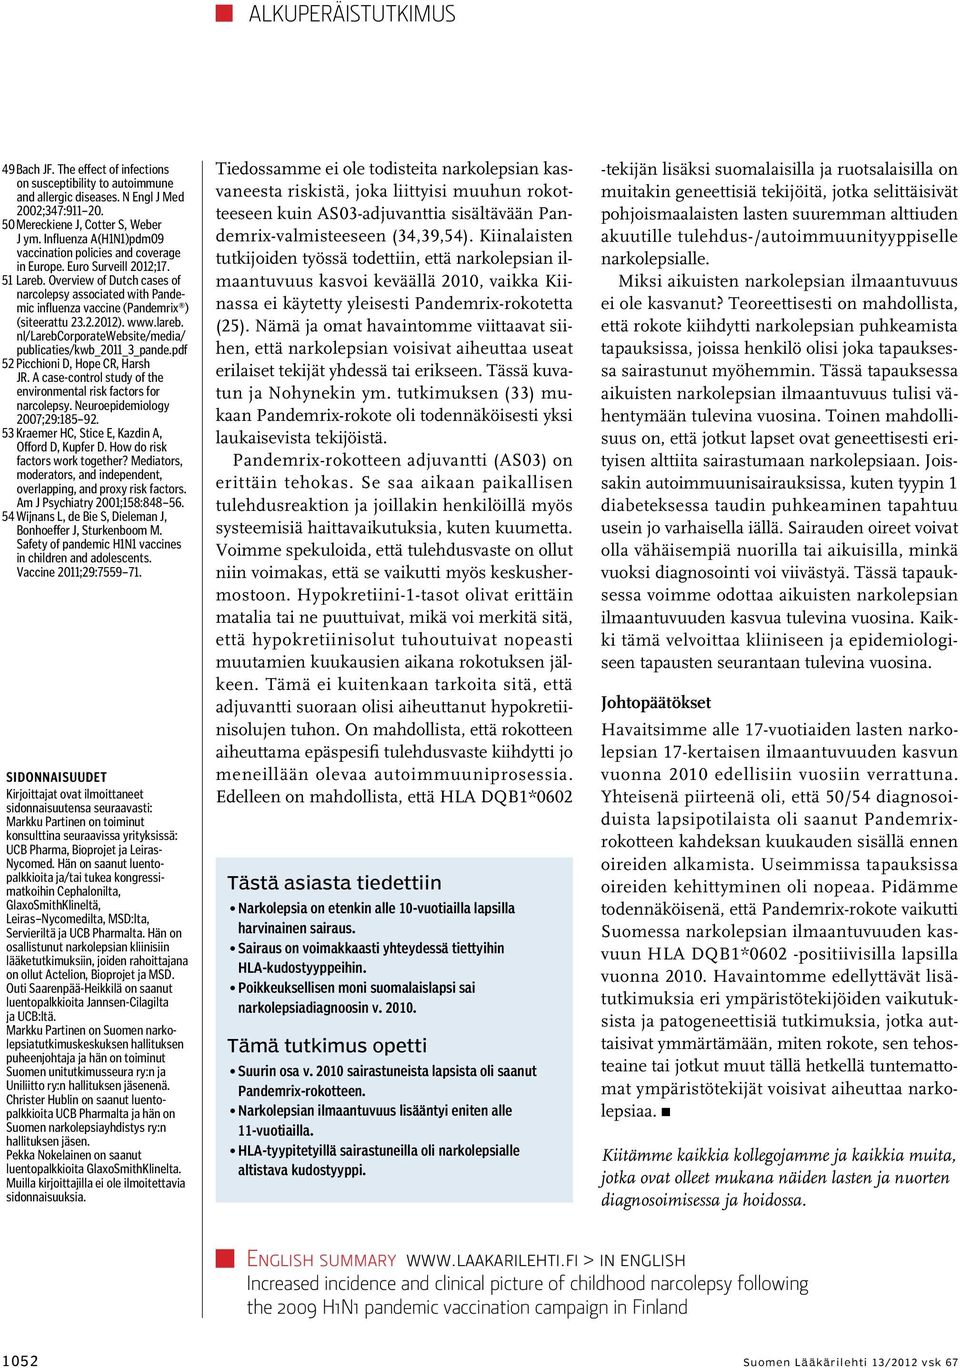 Overview of Dutch cases of narcolepsy associated with Pandemic influenza vaccine (Pandemrix ) (siteerattu 23.2.2012). www.lareb. nl/larebcorporatewebsite/media/ publicaties/kwb_2011_3_pande.